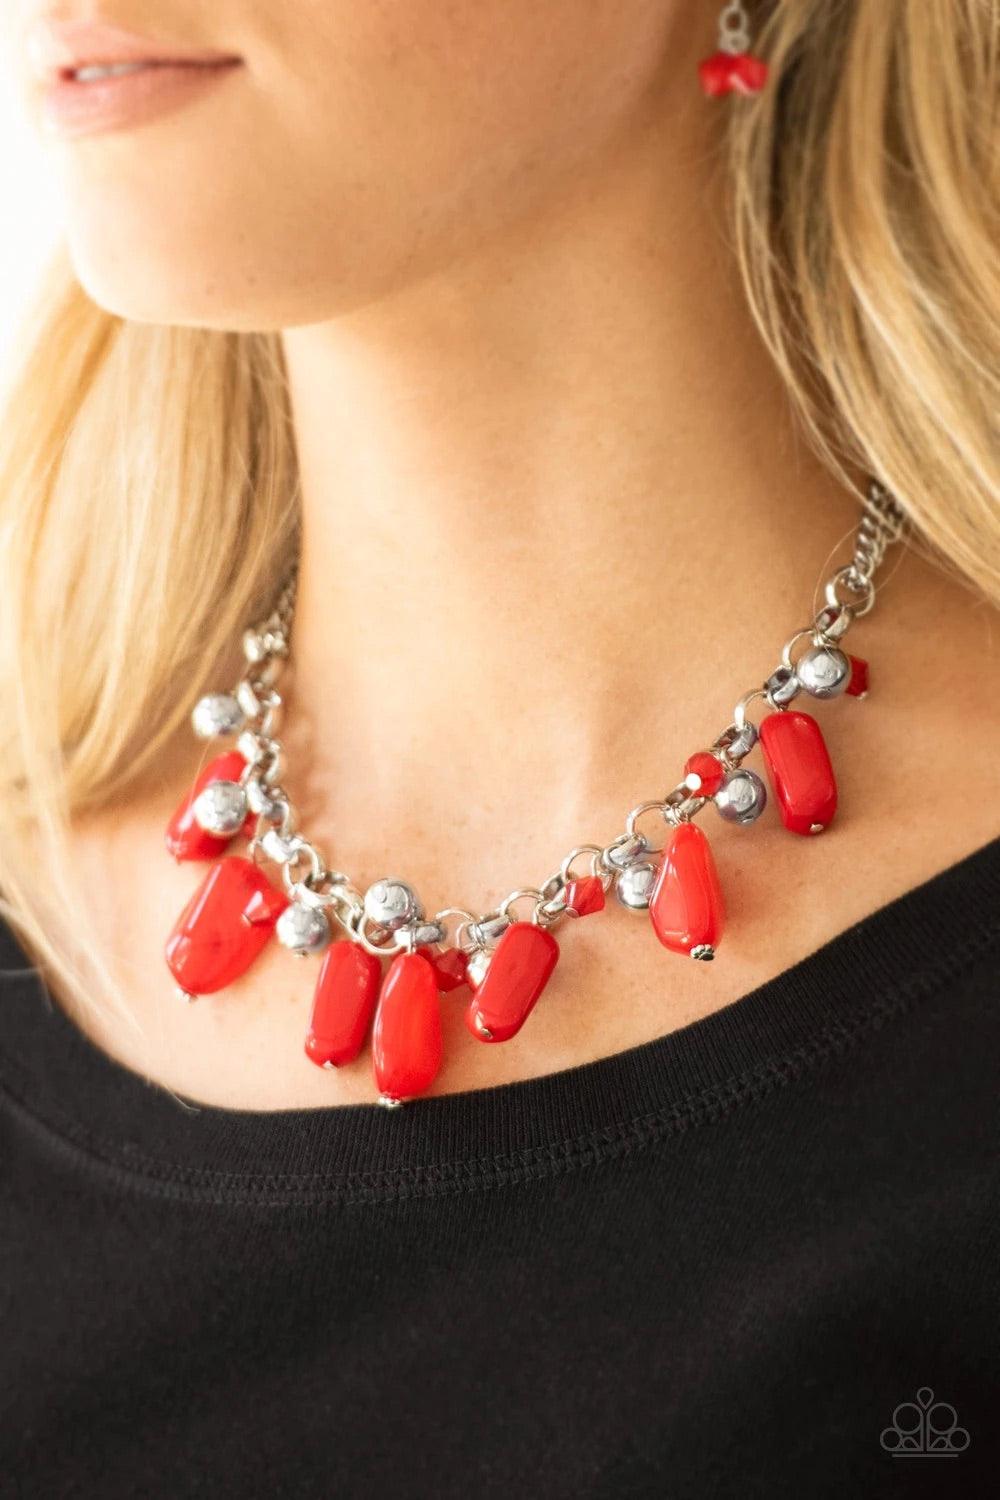 Paparazzi Accessories Grand Canyon Grotto - Red Featuring polished and cloudy finishes, a collection of red faux rocks dance from the bottom of a bold silver chain. Classic silver beads trickle between the colorful beading, adding a metallic shimmer to th